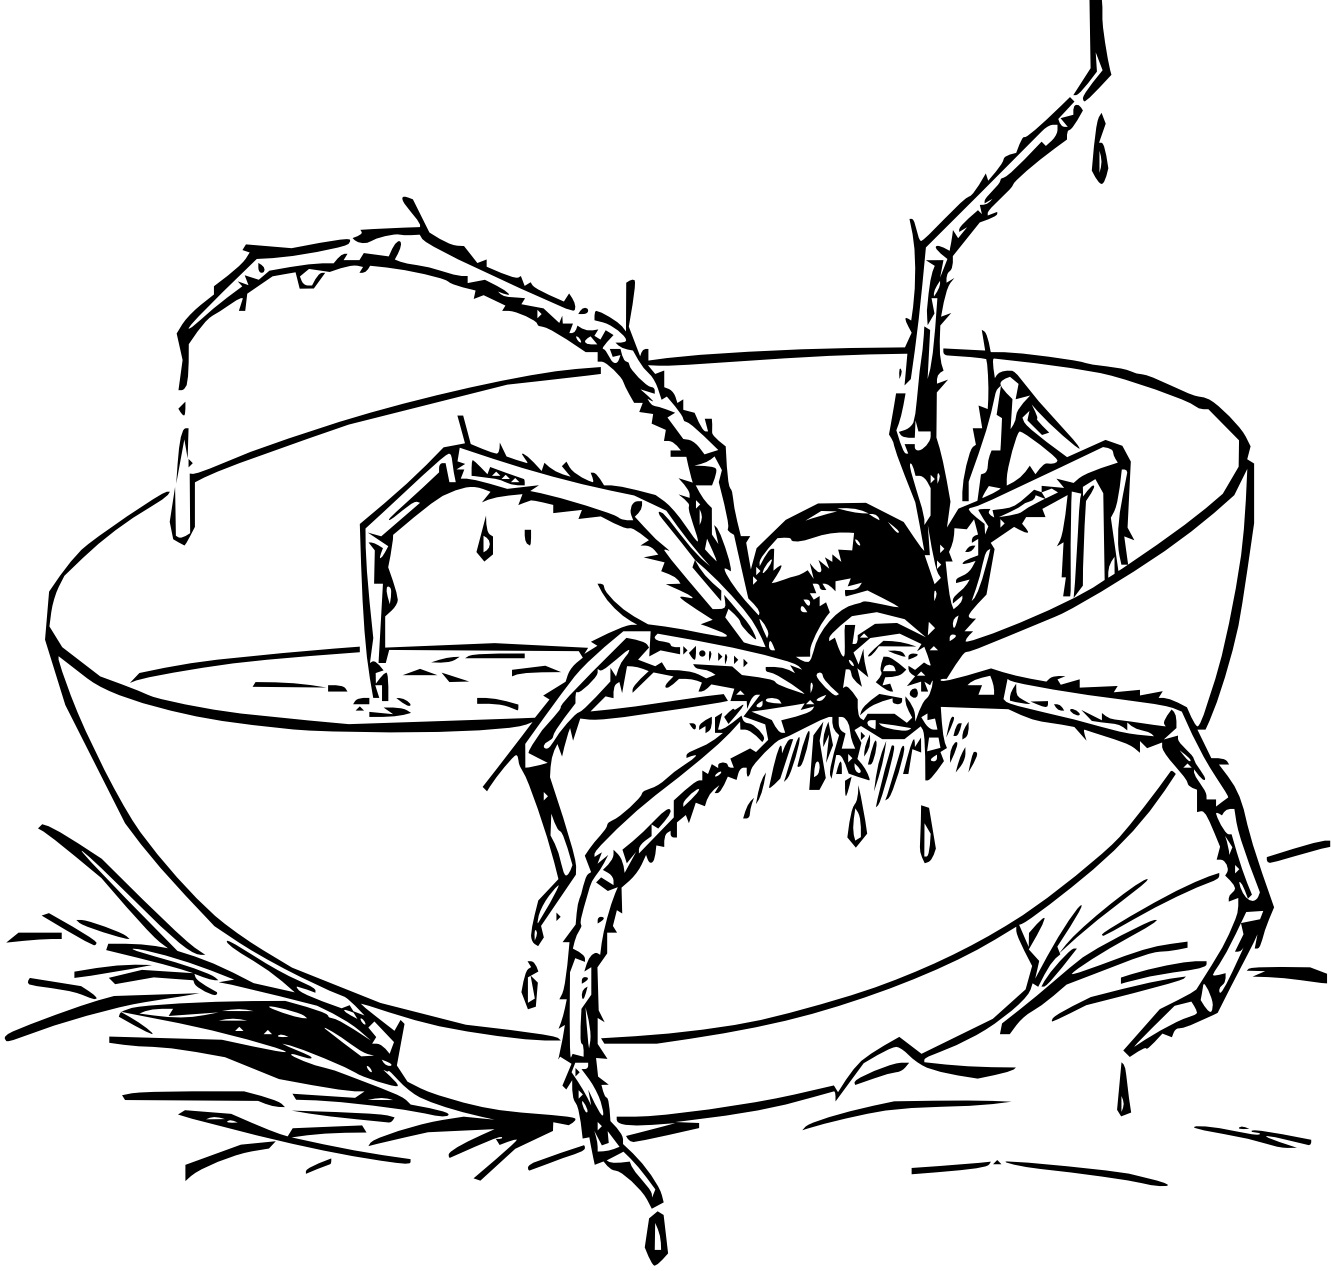 spider woman coloring pages